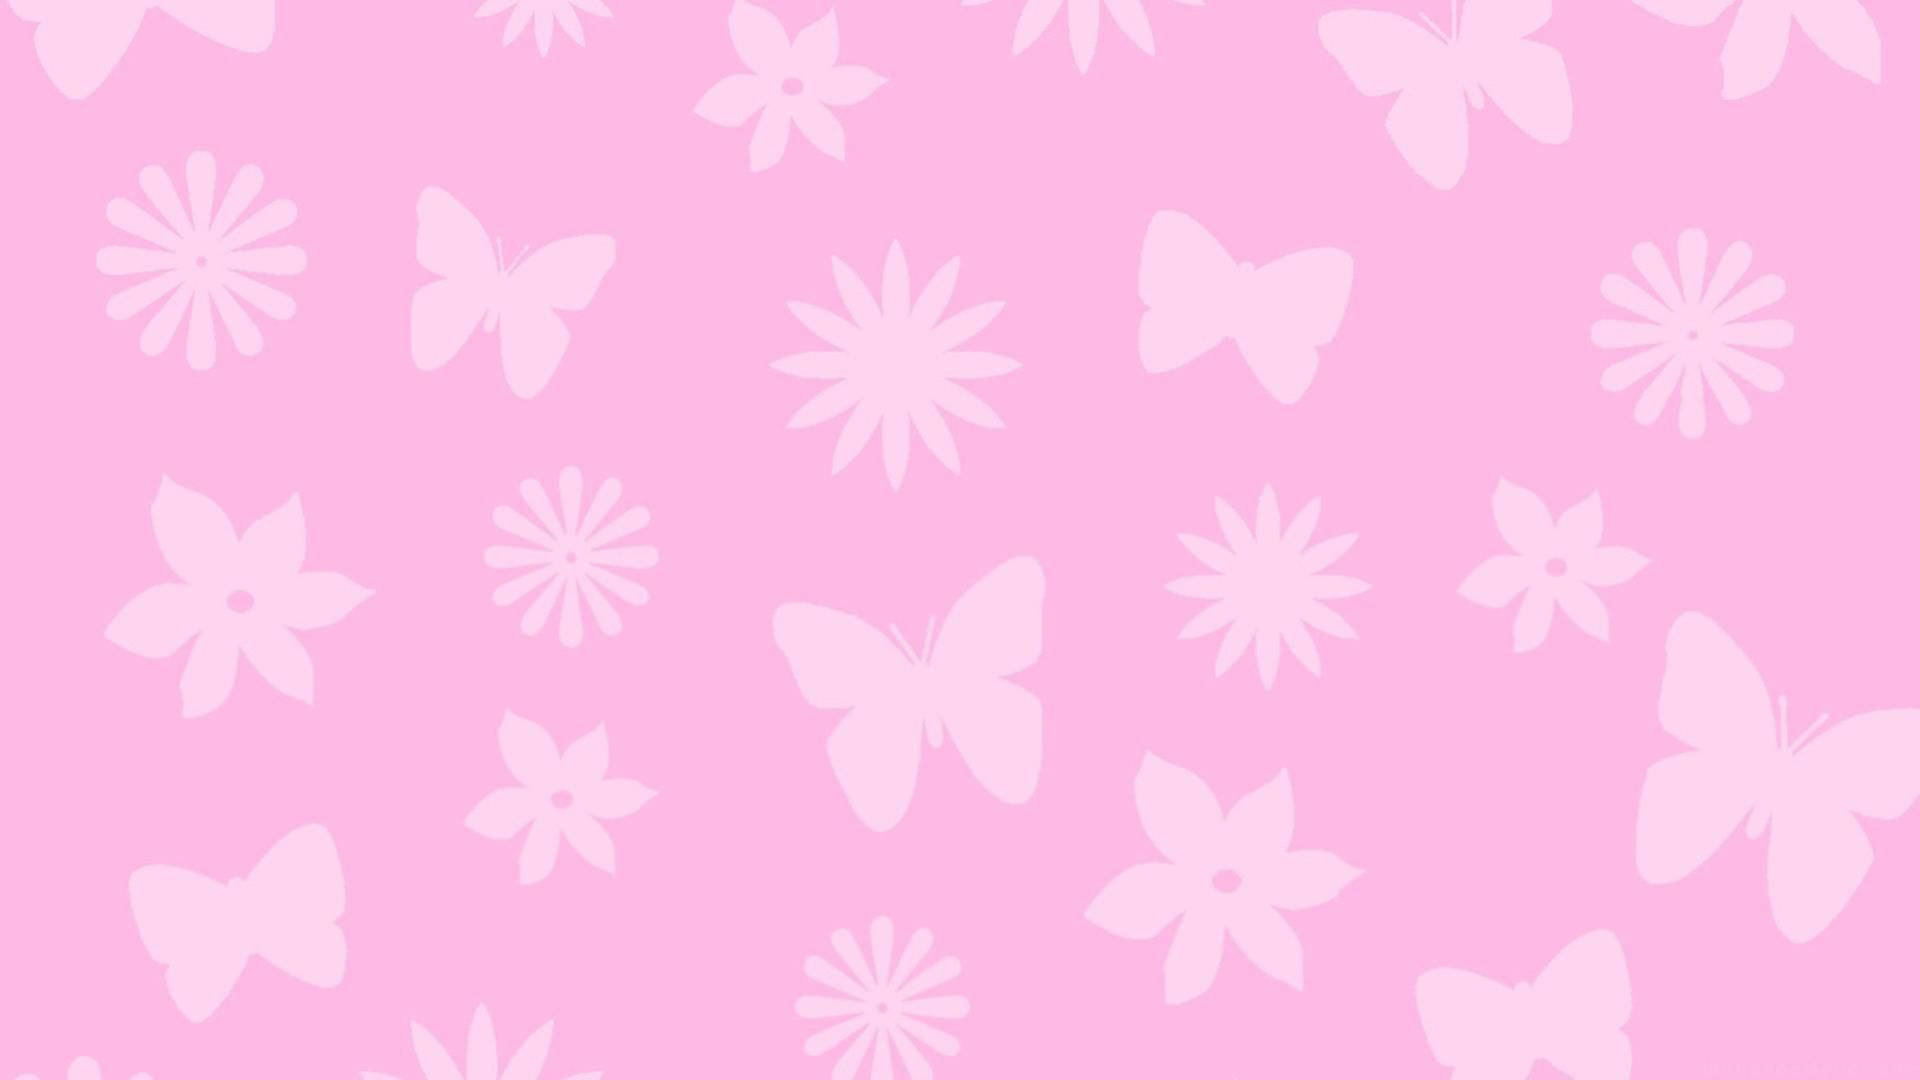 Cute Pink Girly Patterns Background